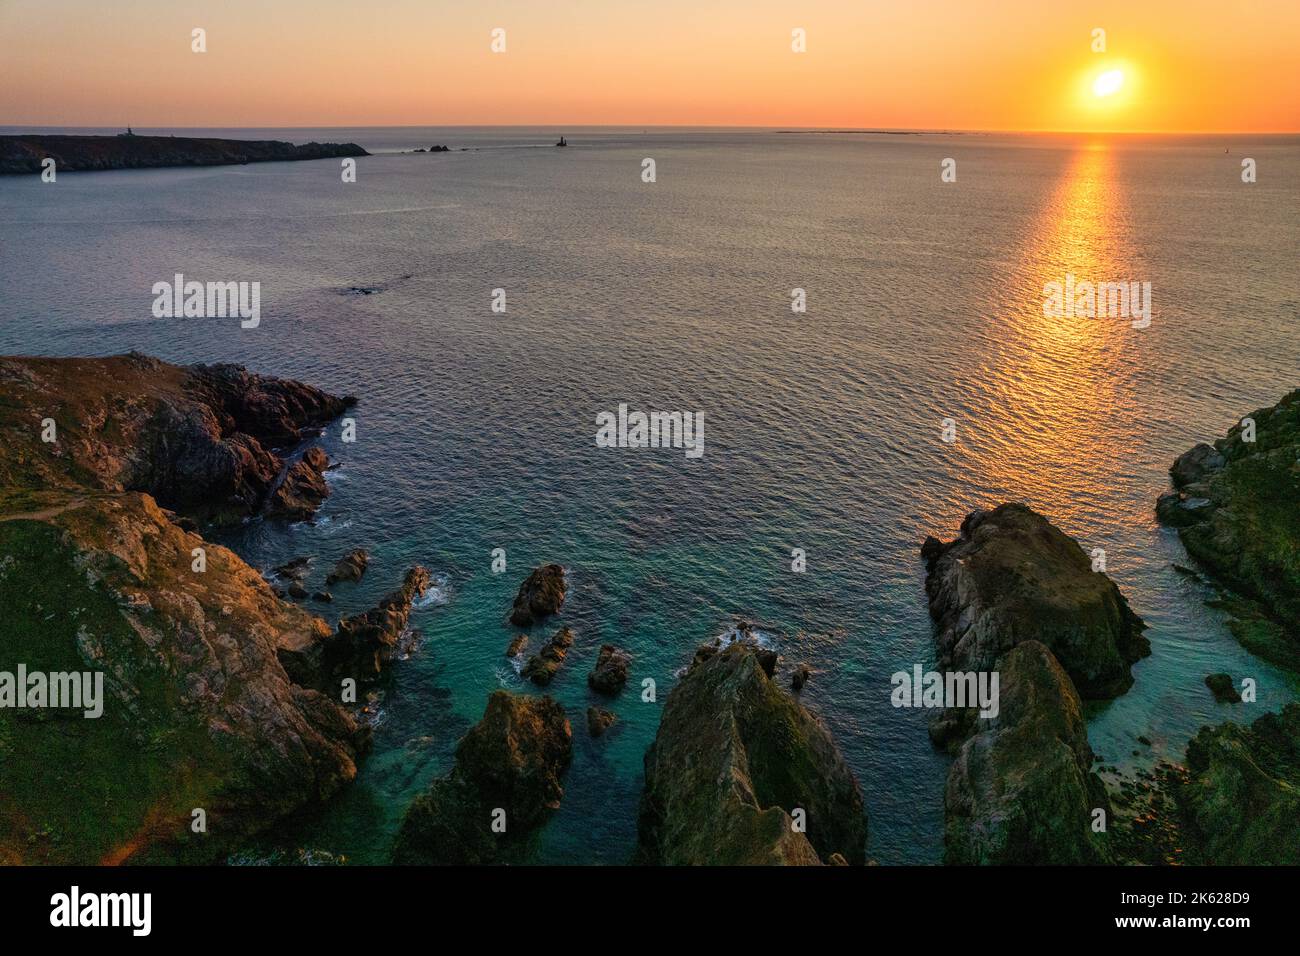 Aerial shot of a warm sunset over the ocean at the Torche point, Brittany, France Stock Photo